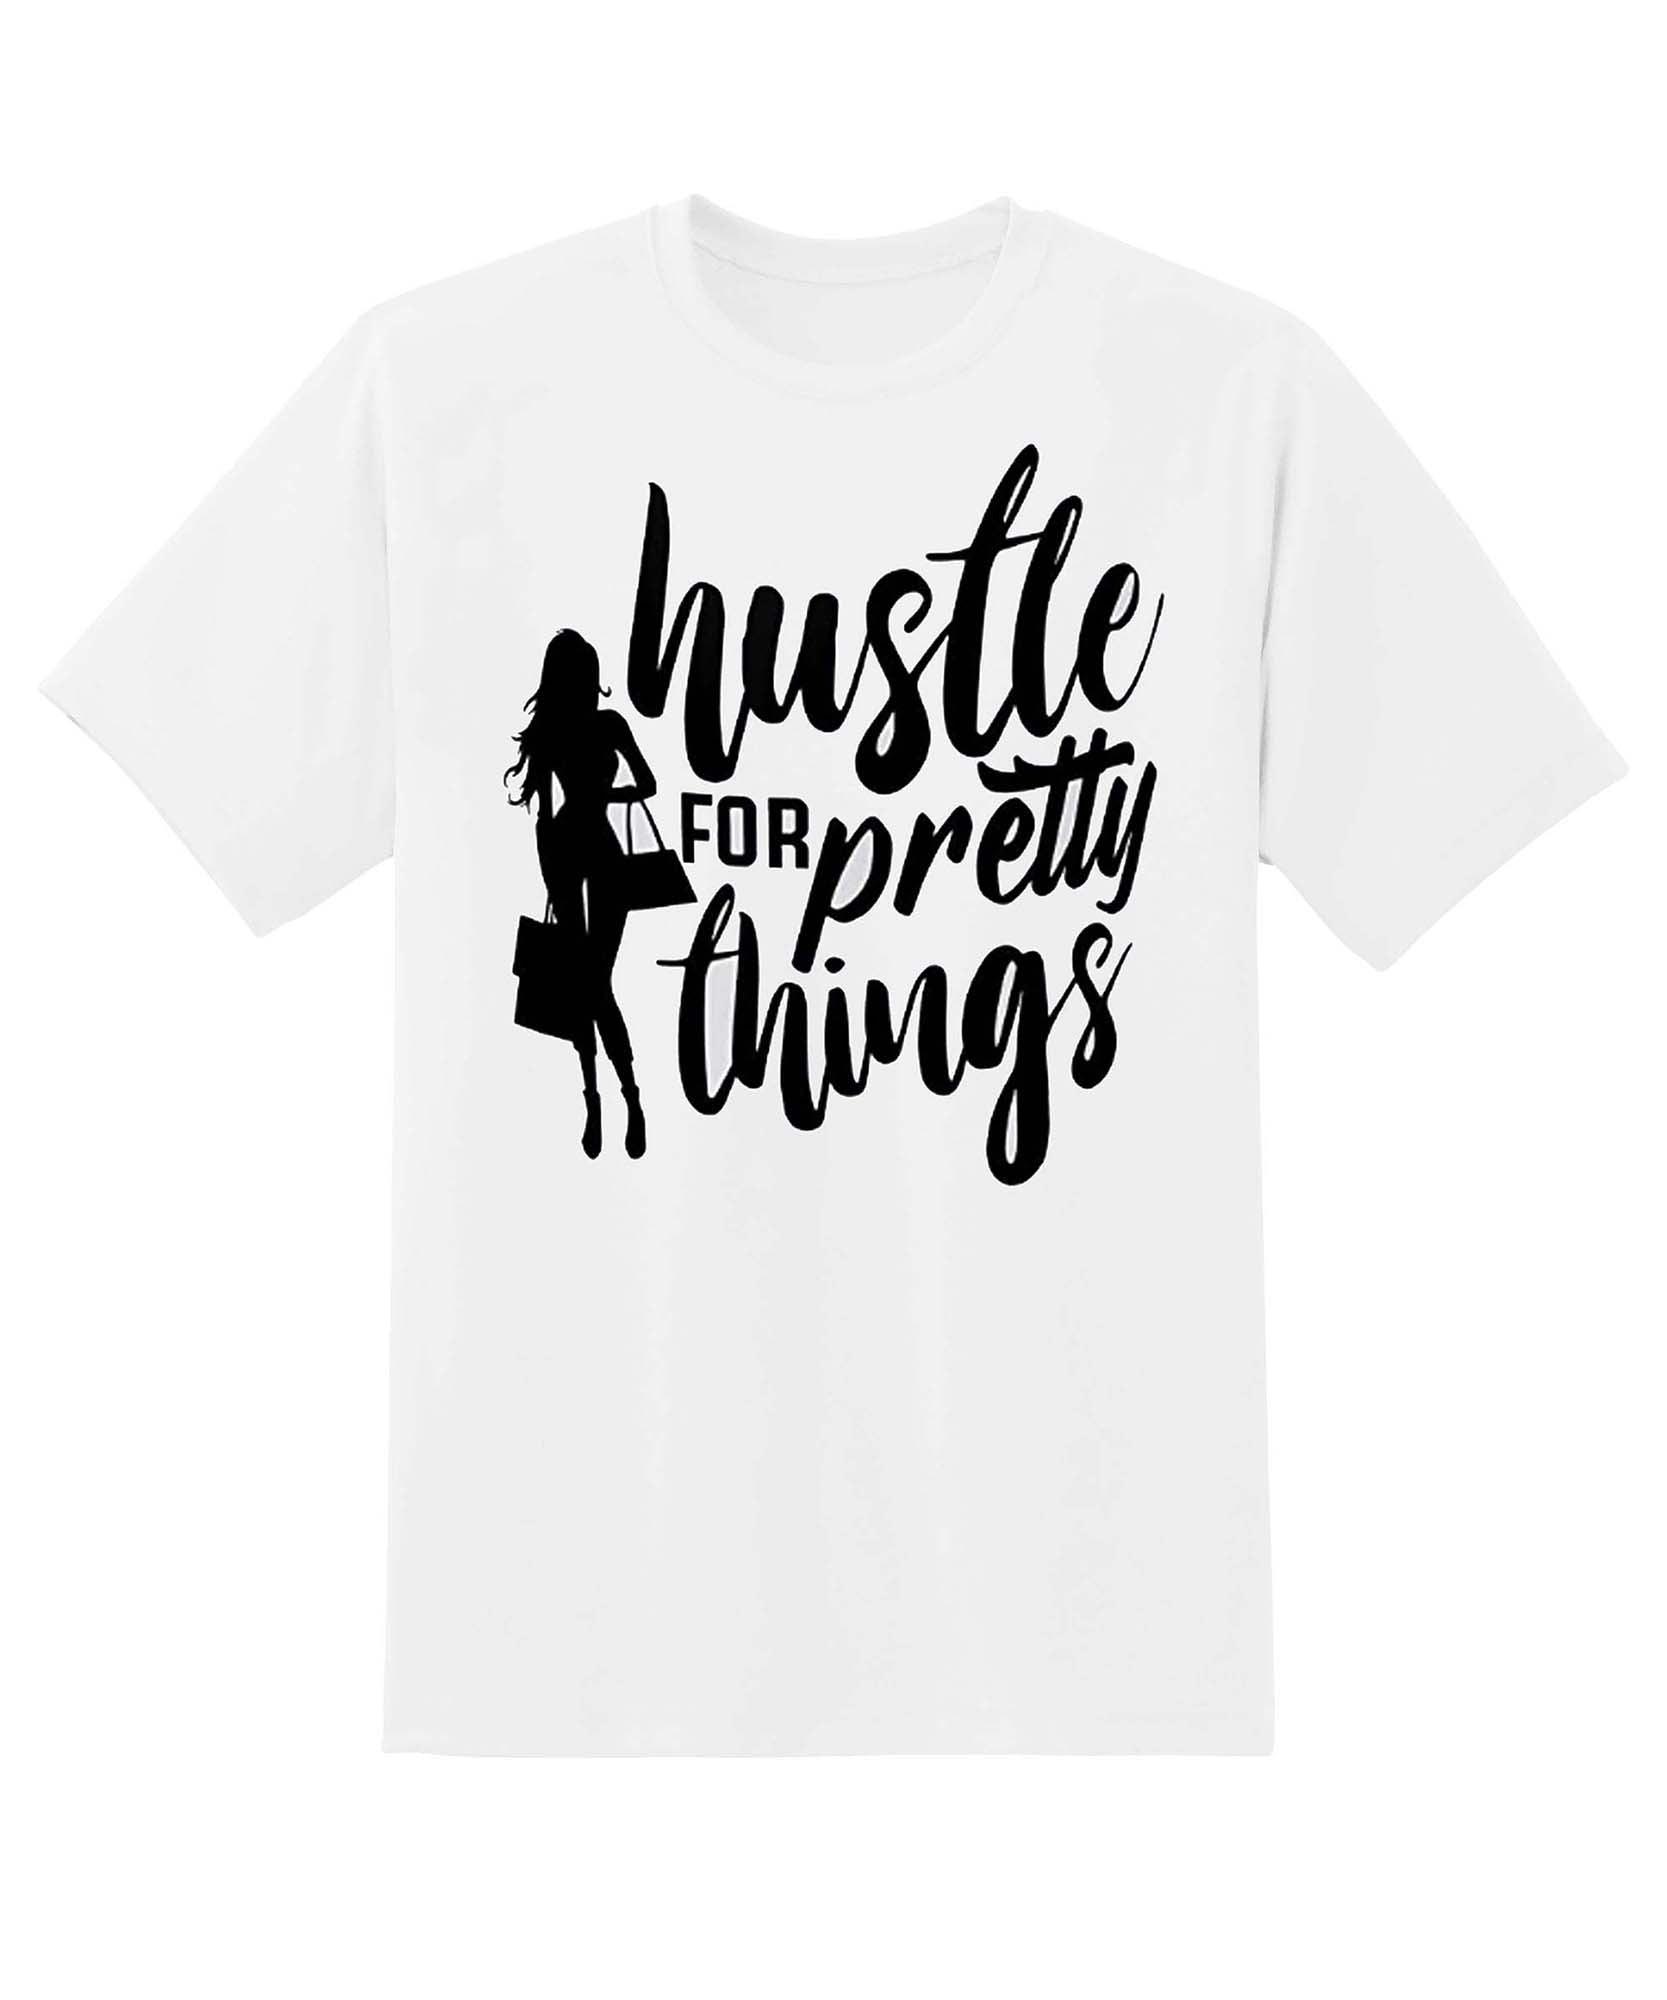 Skitongift Boss Lady HusTle For Pretty Thing Funny Shirts Hoodie Sweater Short Sleeve Casual Shirt